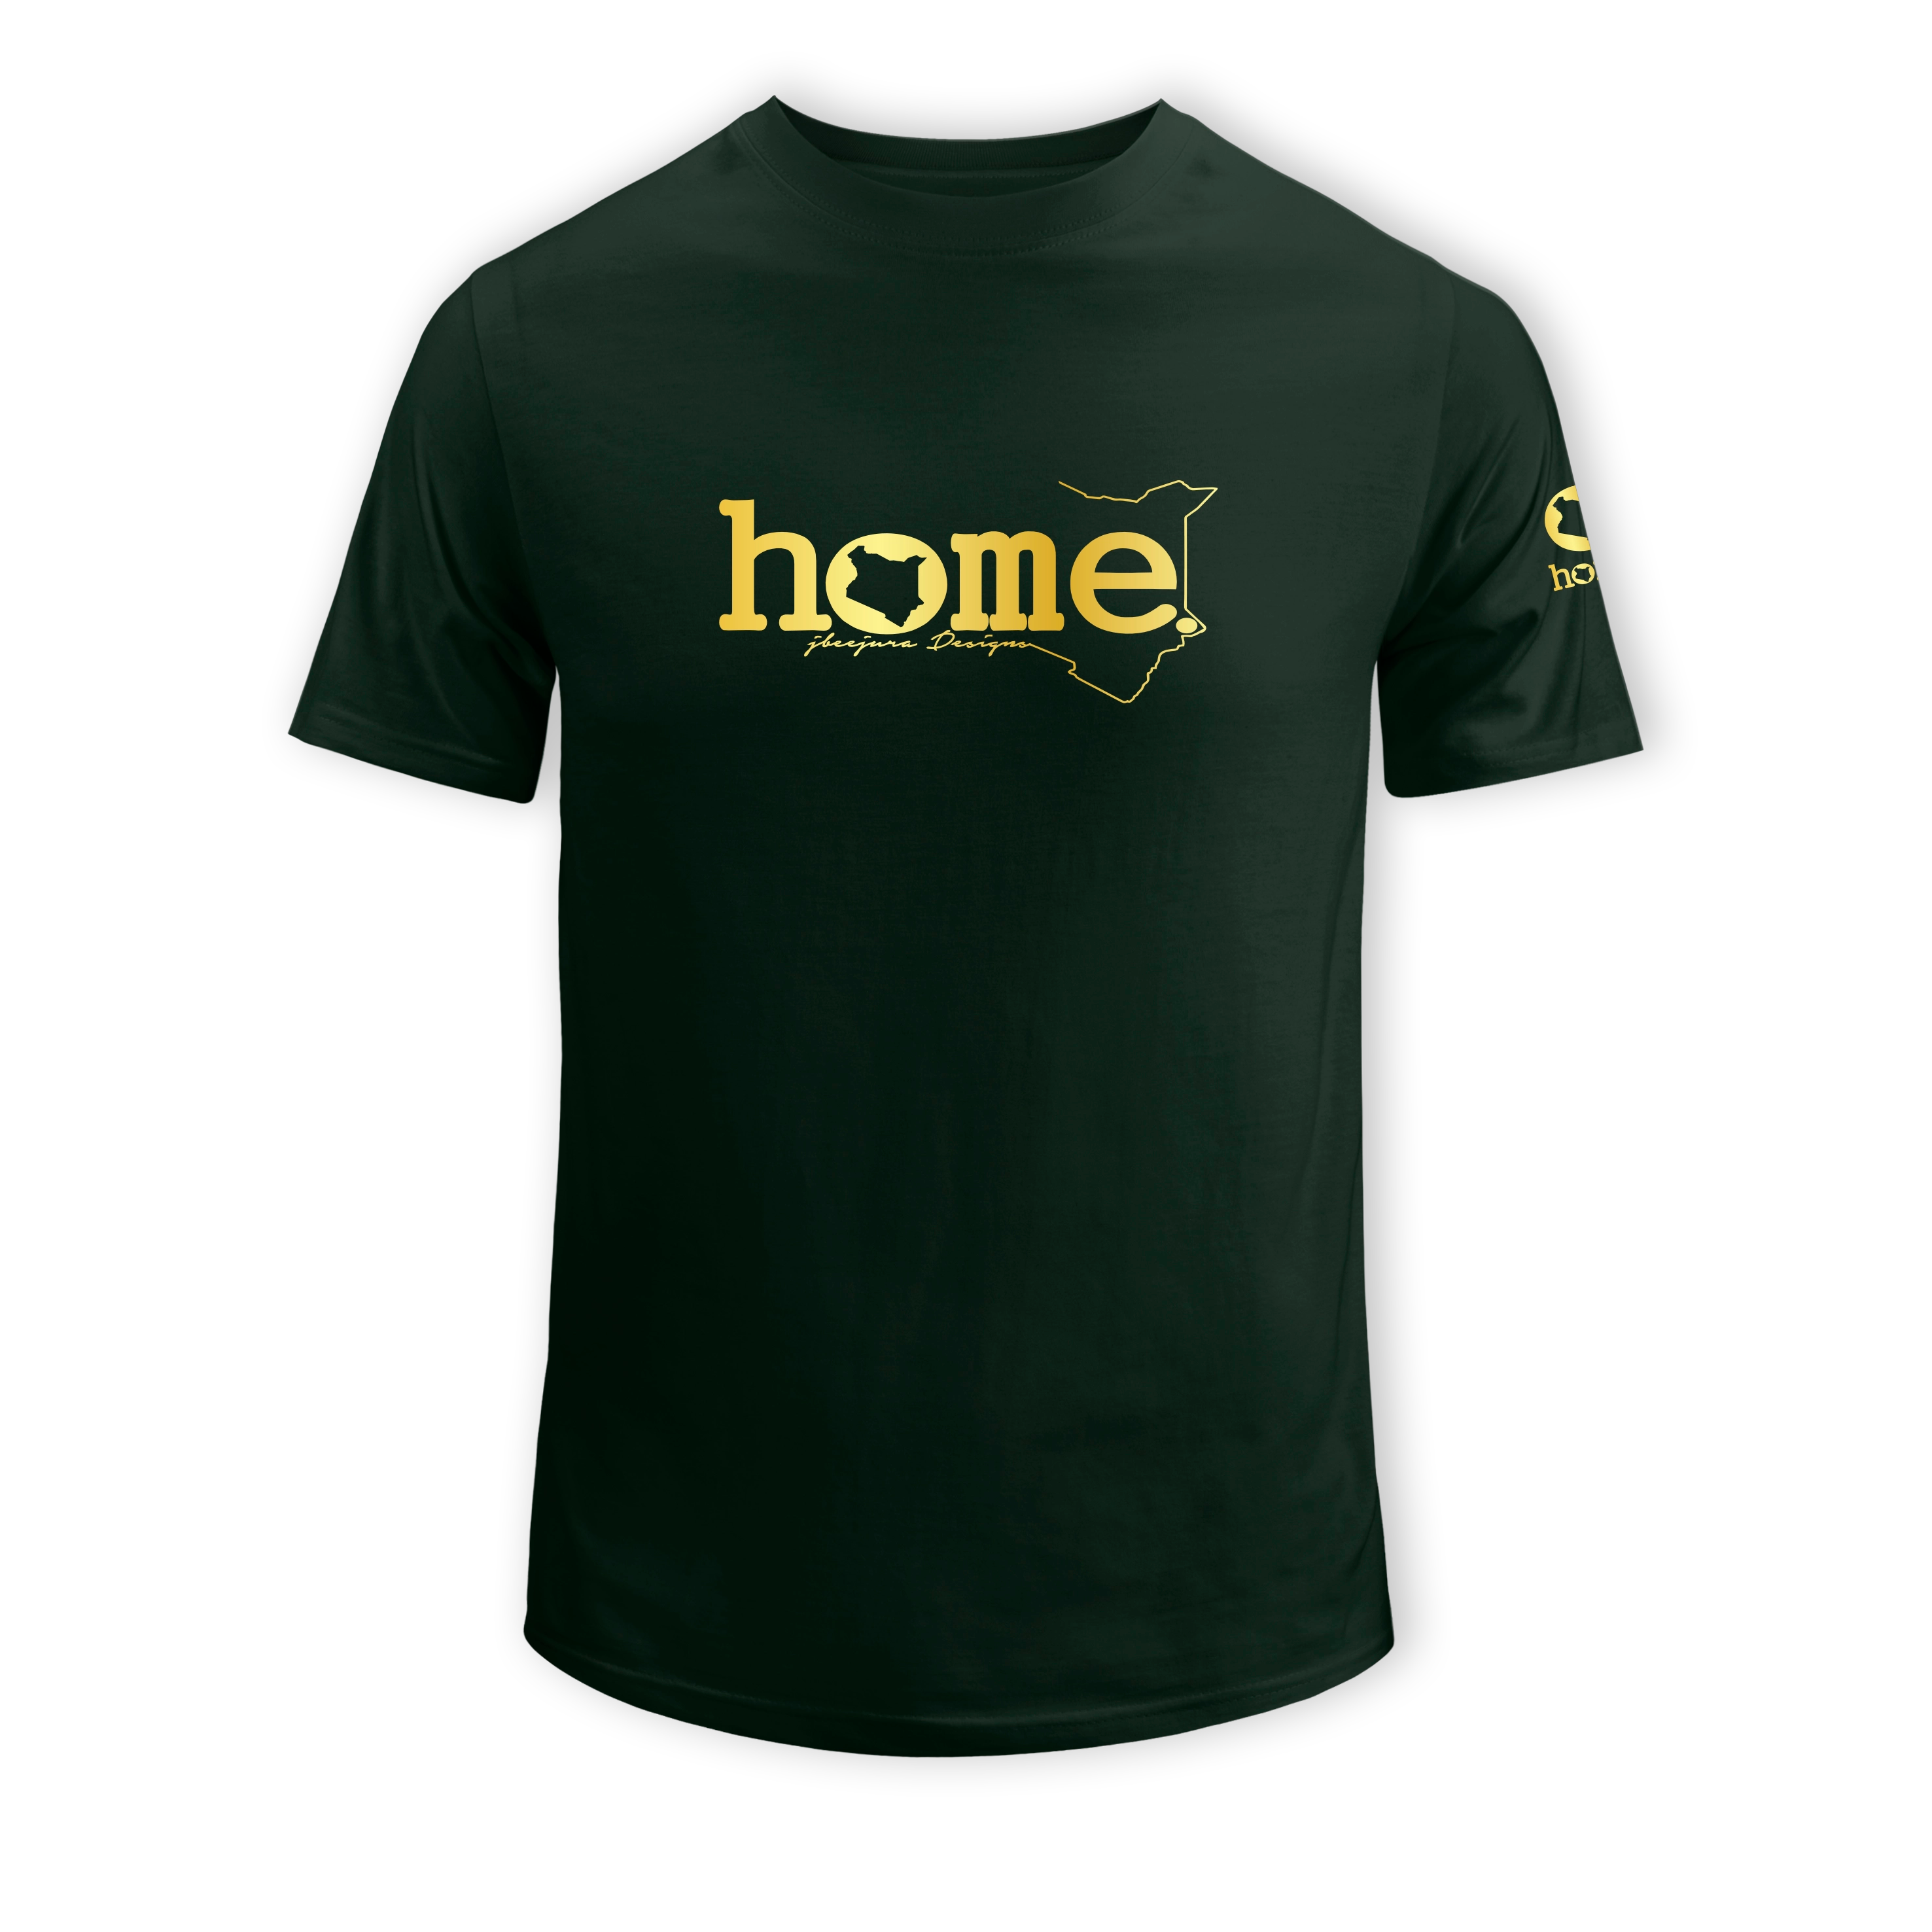 home_254 SHORT-SLEEVED FOREST GREEN T-SHIRT WITH A GOLD CLASSIC WORDS PRINT – COTTON PLUS FABRIC